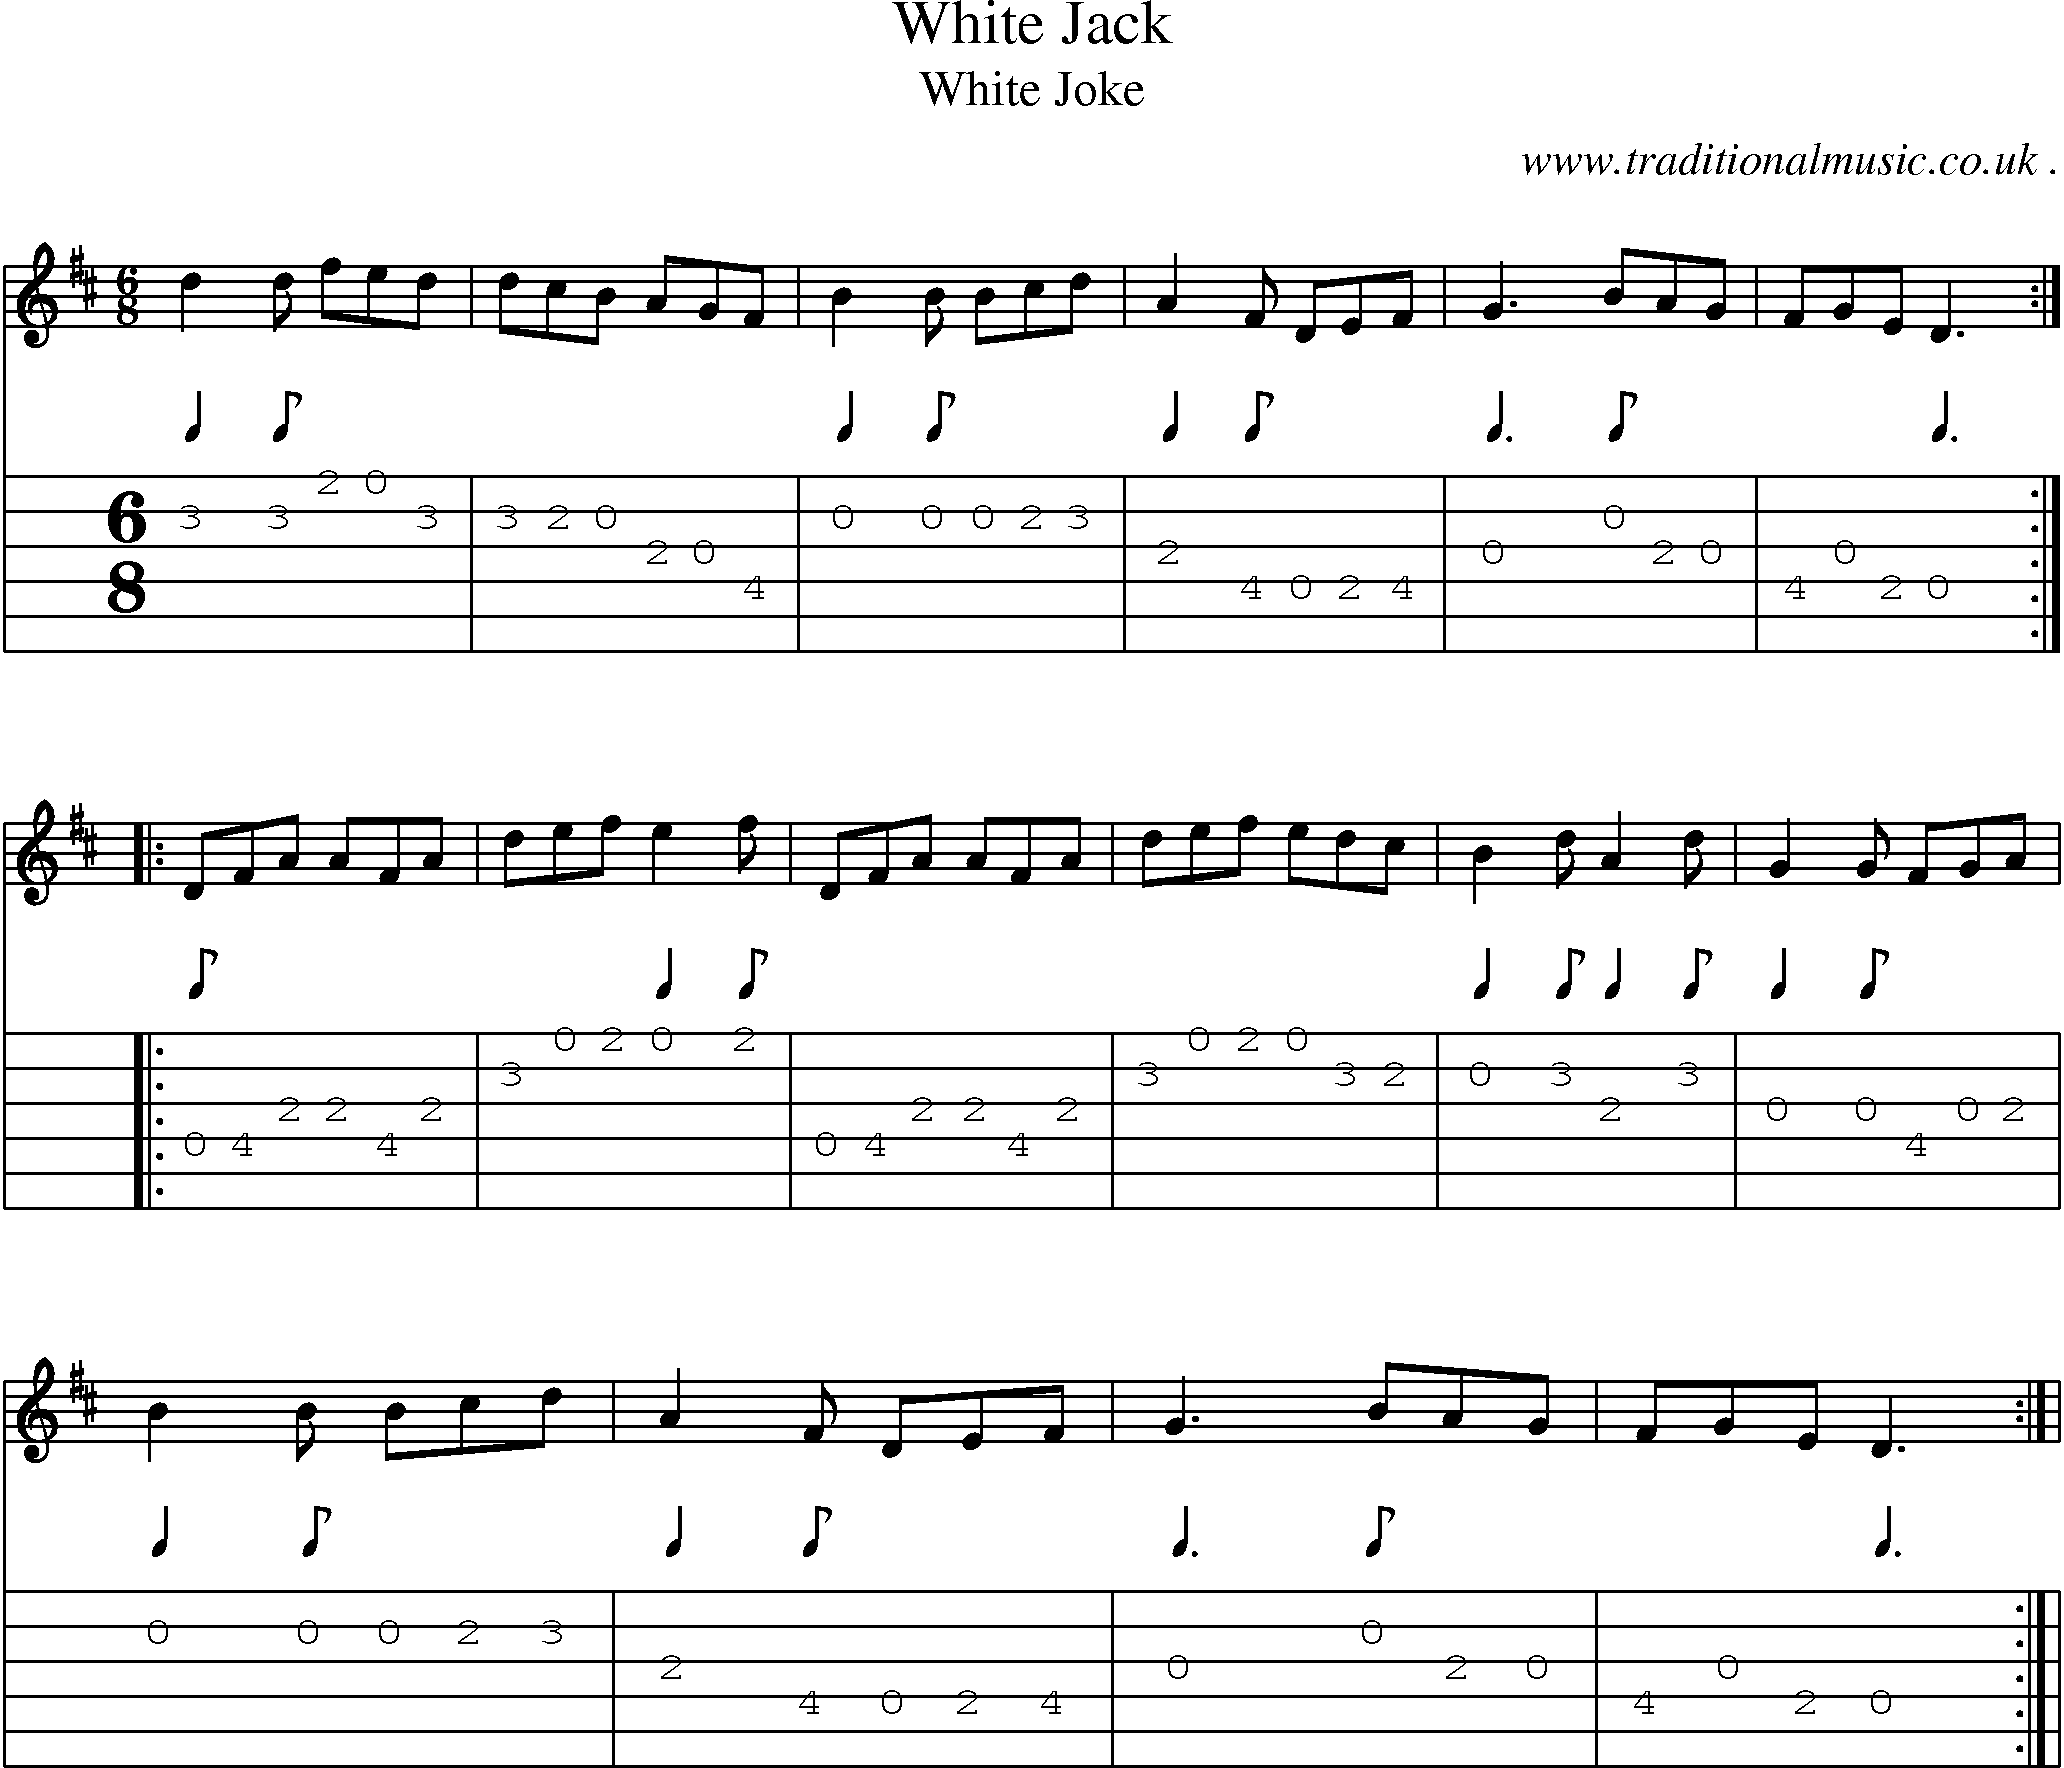 Sheet-Music and Guitar Tabs for White Jack